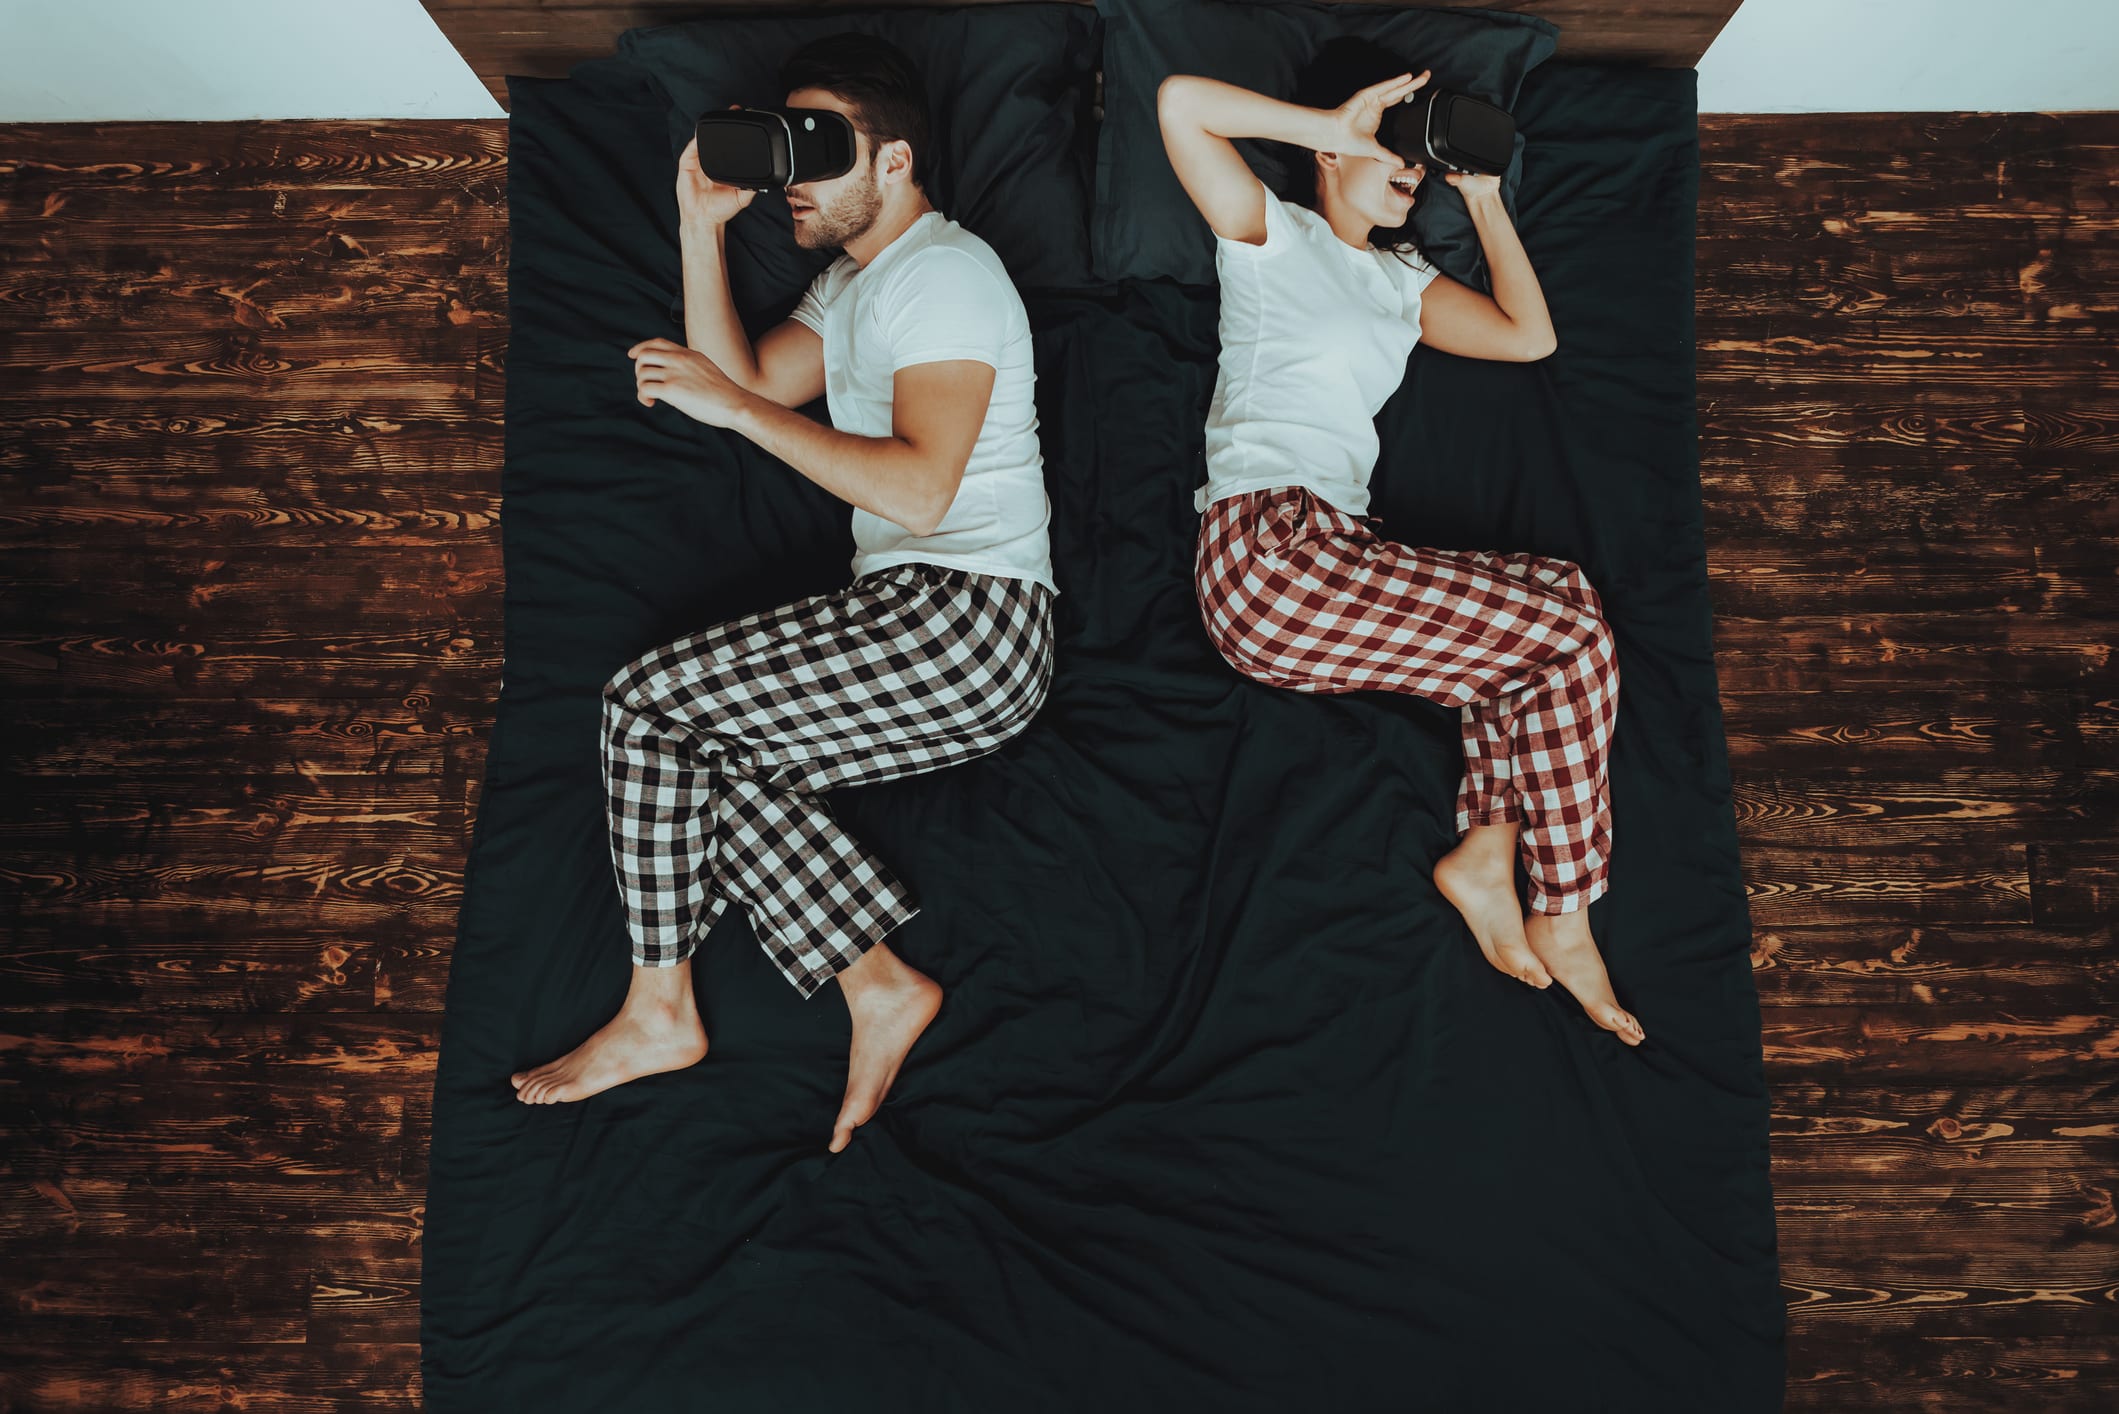 Couple is Lying on Bed. Couple is Young Beautiful Woman and Man. People is Using Virtual Reality Glasses. People is Wearing Pajama Pants and T-Shirts. Persons in Home Interior. Top View.